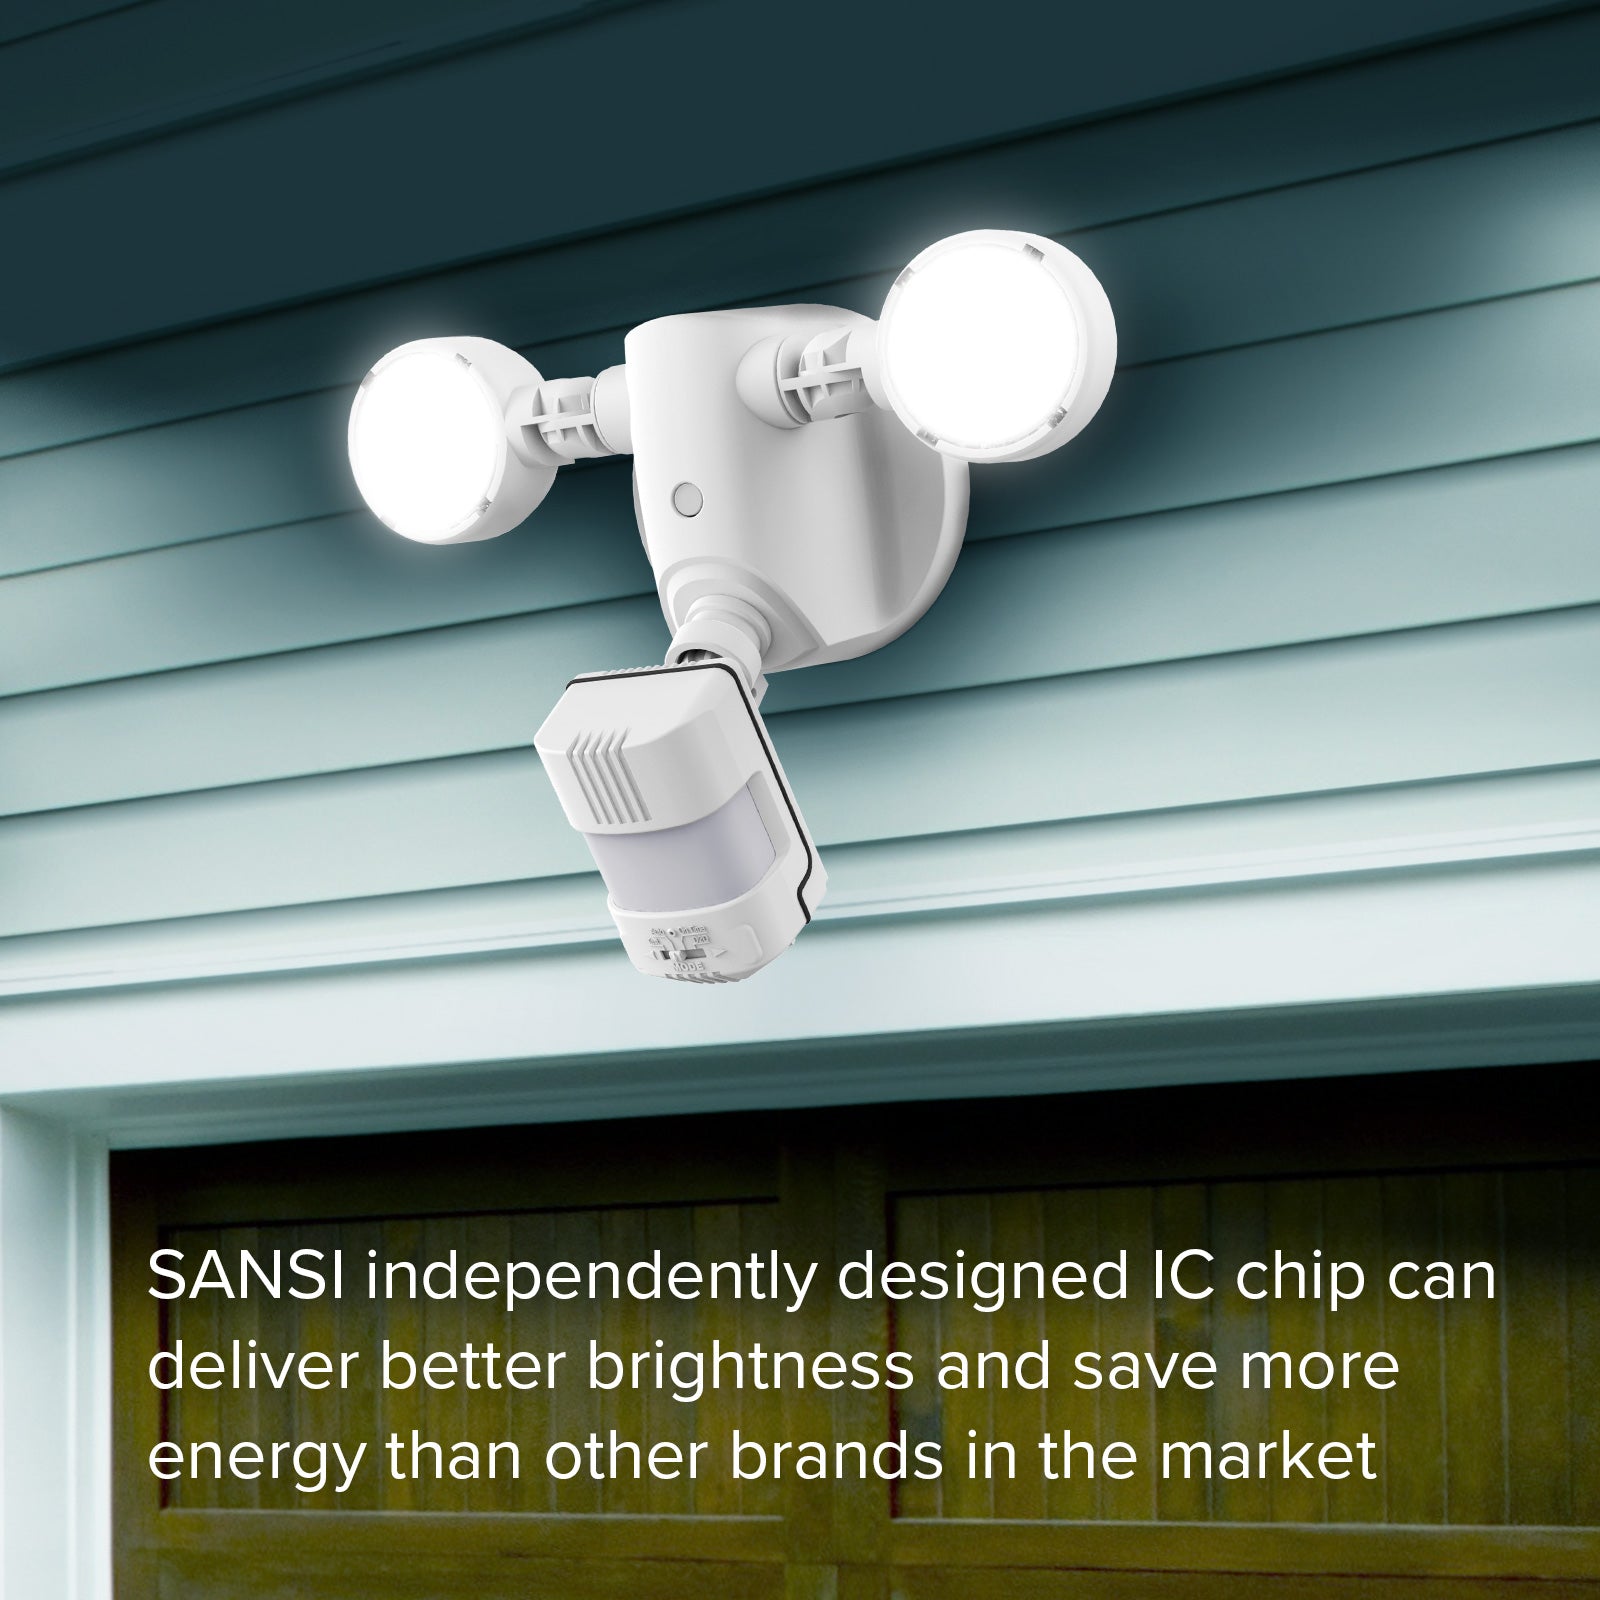 15W LED Security Light (Dusk to Dawn & Motion Sensor) adopt the drive power IC chip independently designed by SANSI, superior brightness and save more energy than other brands in the market